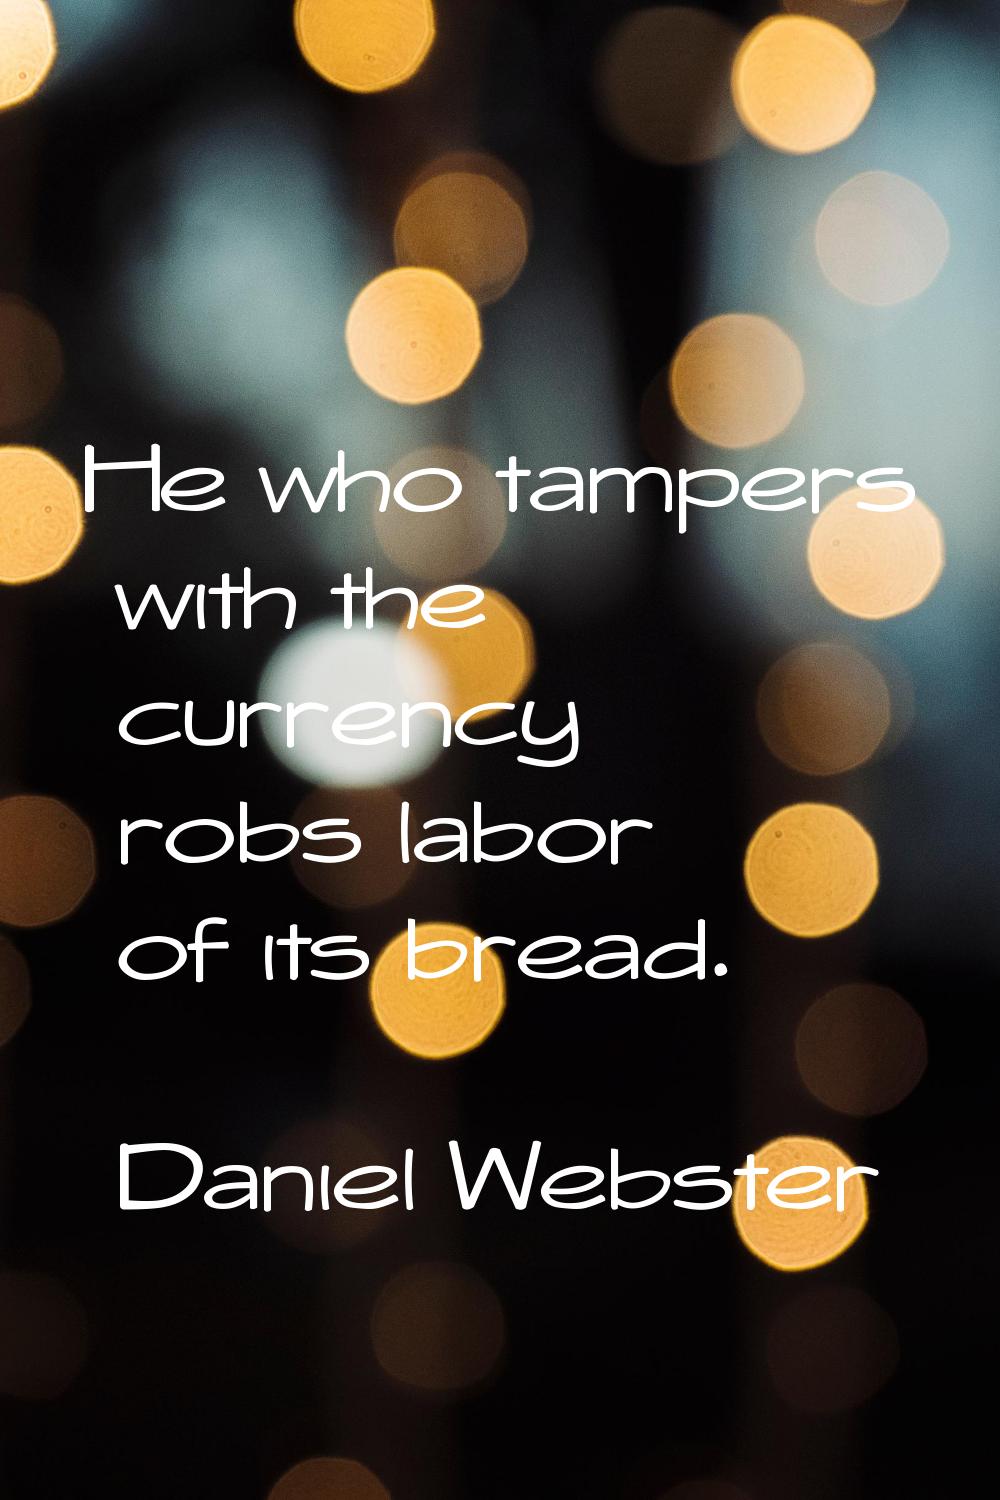 He who tampers with the currency robs labor of its bread.